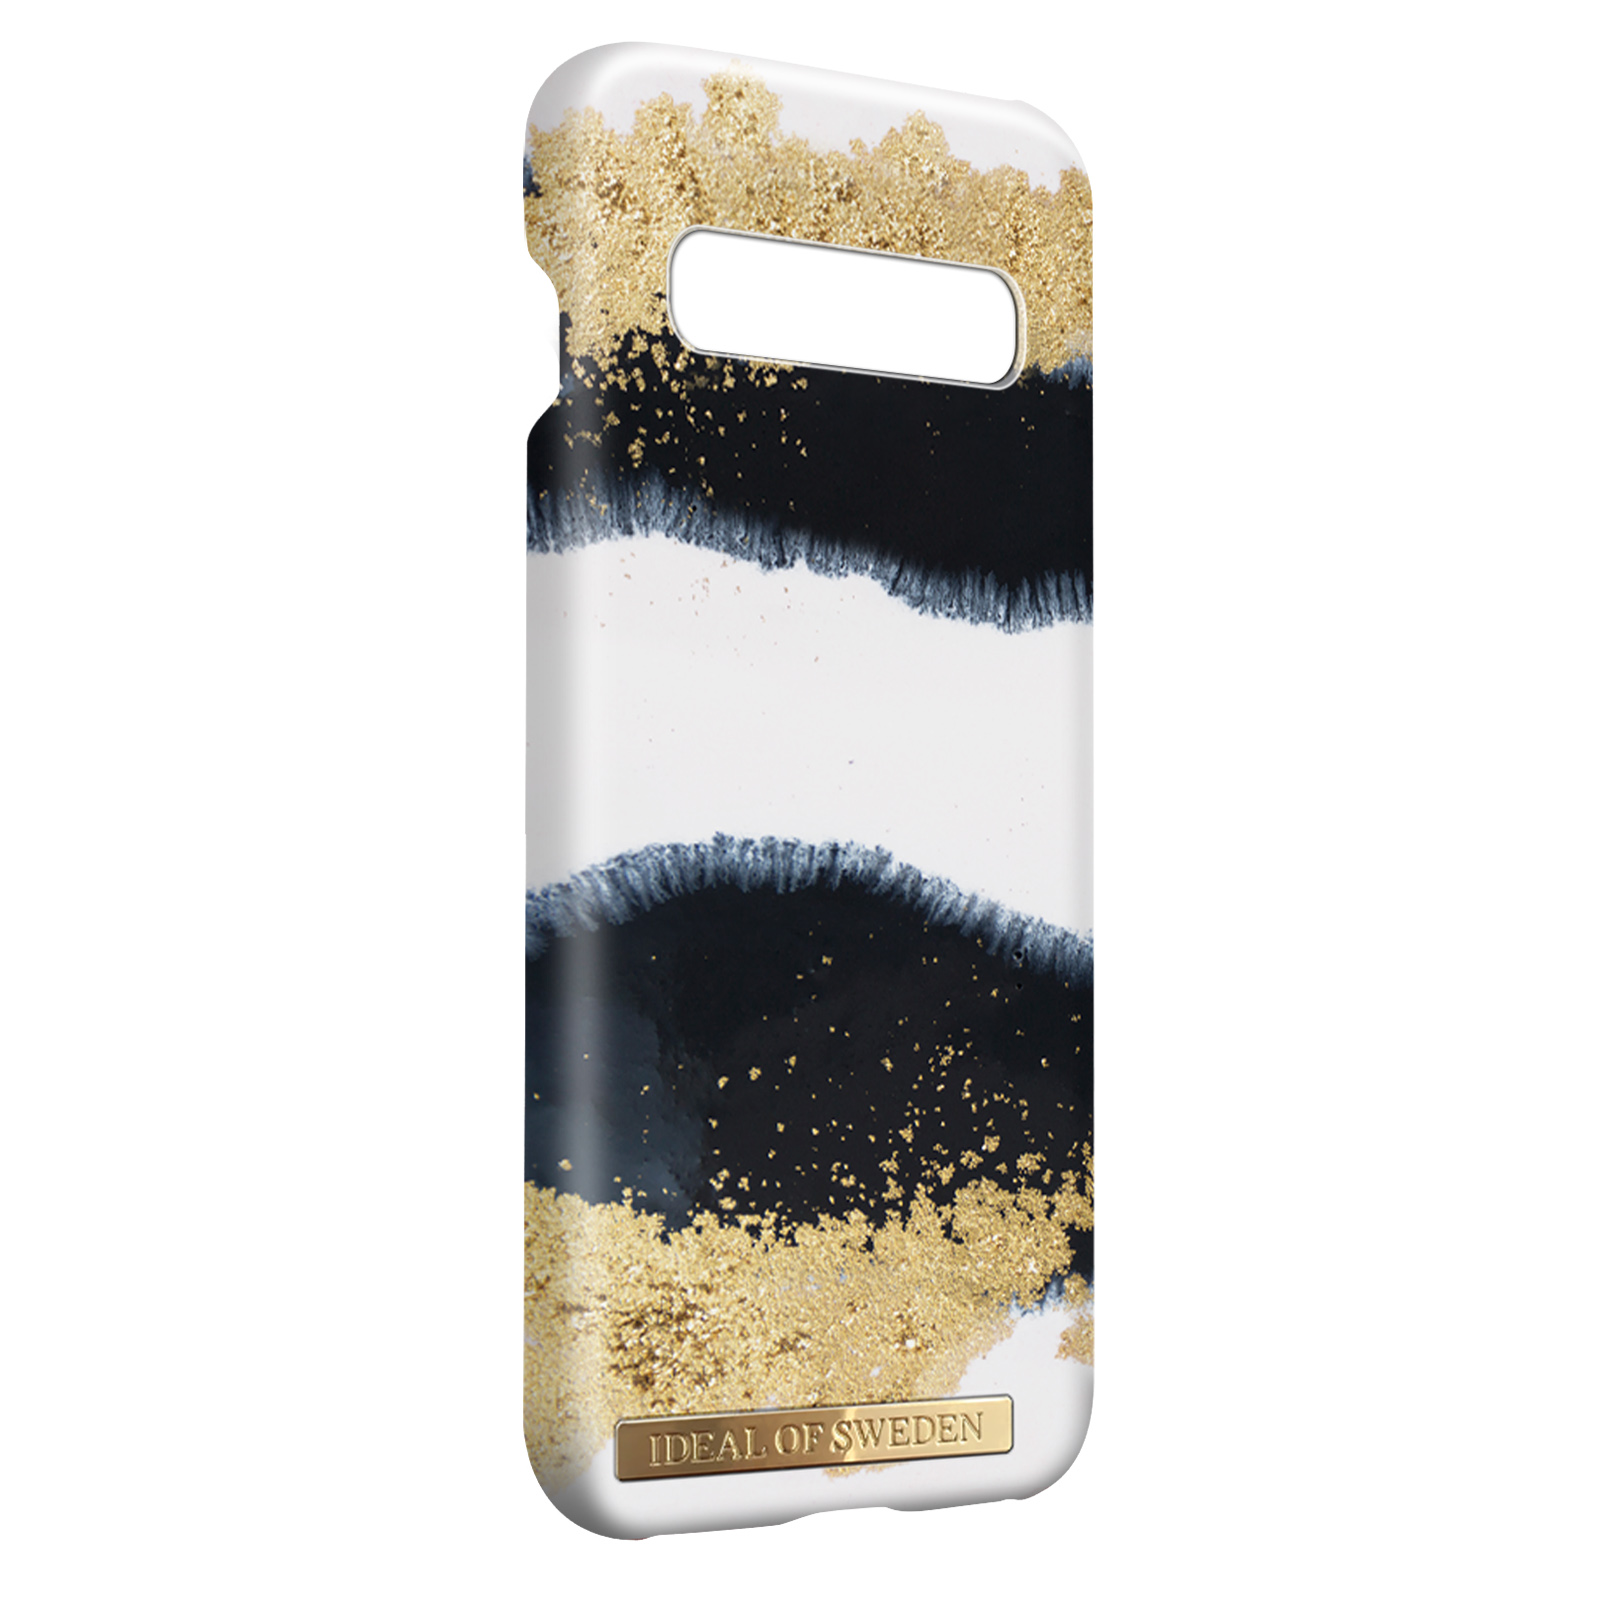 SWEDEN Galaxy Licorice Gold Gleaming Samsung, OF IDEAL S10, Series, Backcover,